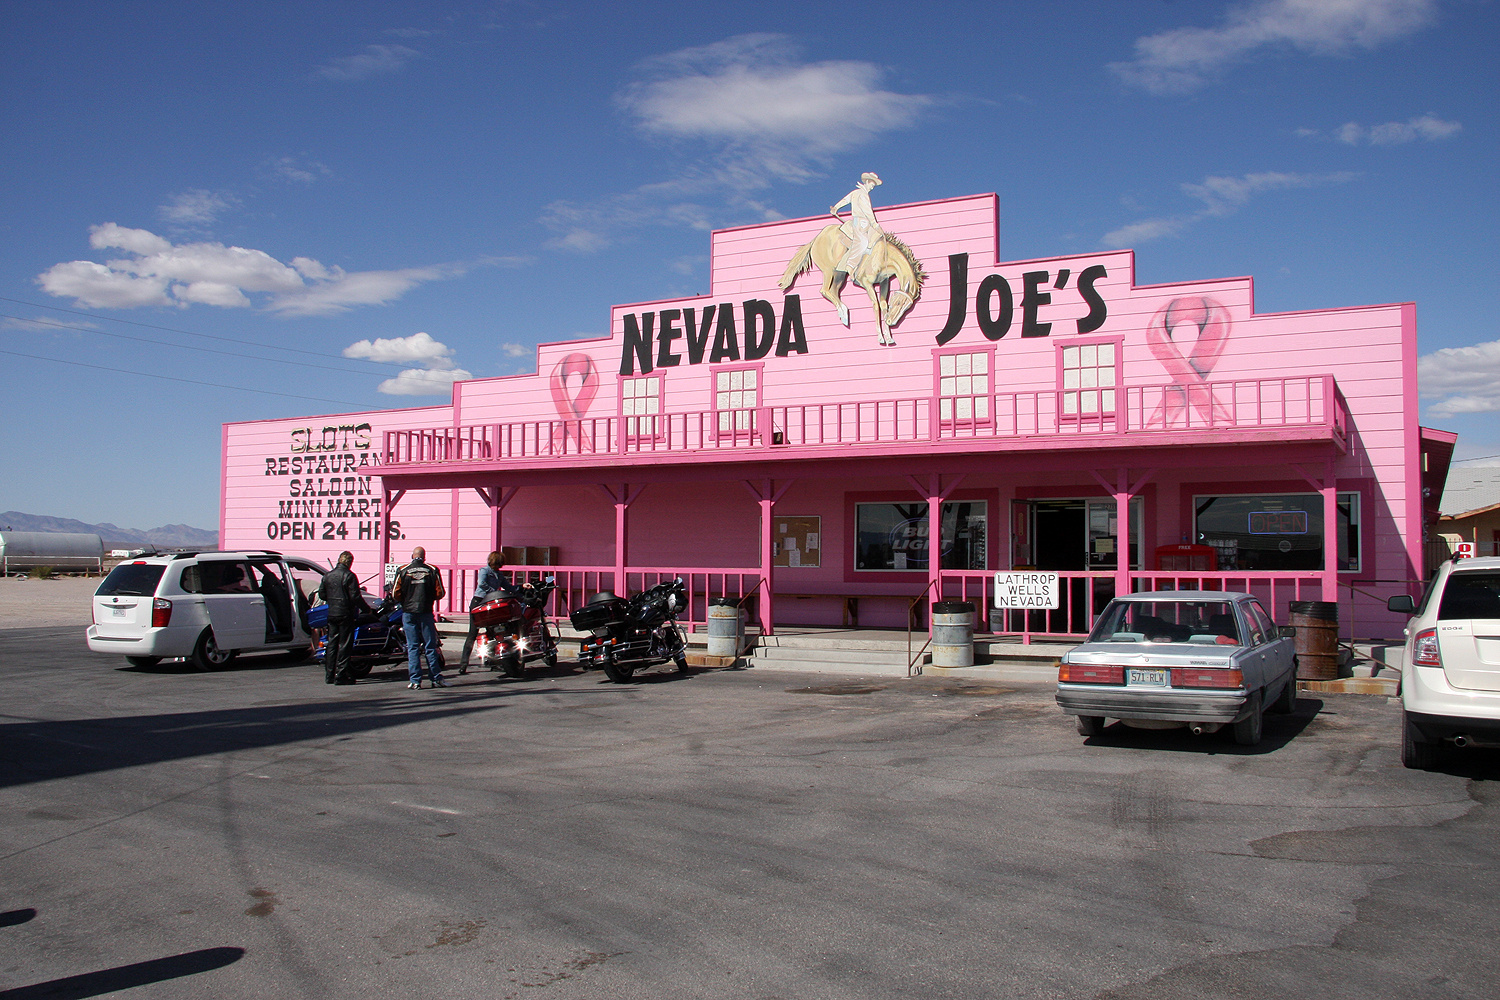 With Byces at the Nevada Joe´s Saloon